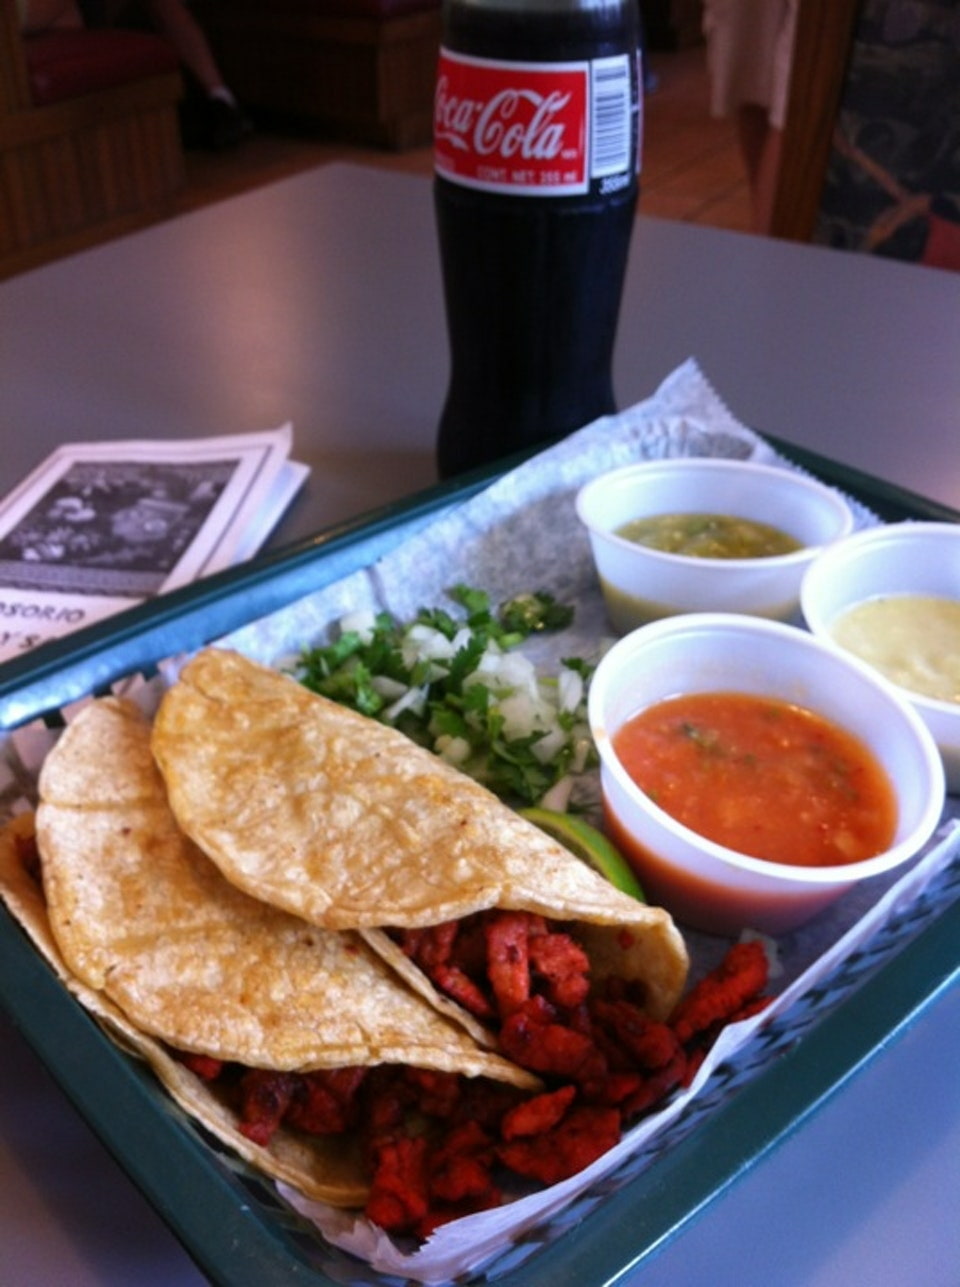 Two tacos on a platter with three sides of salsa and a coke in a glass bottle.